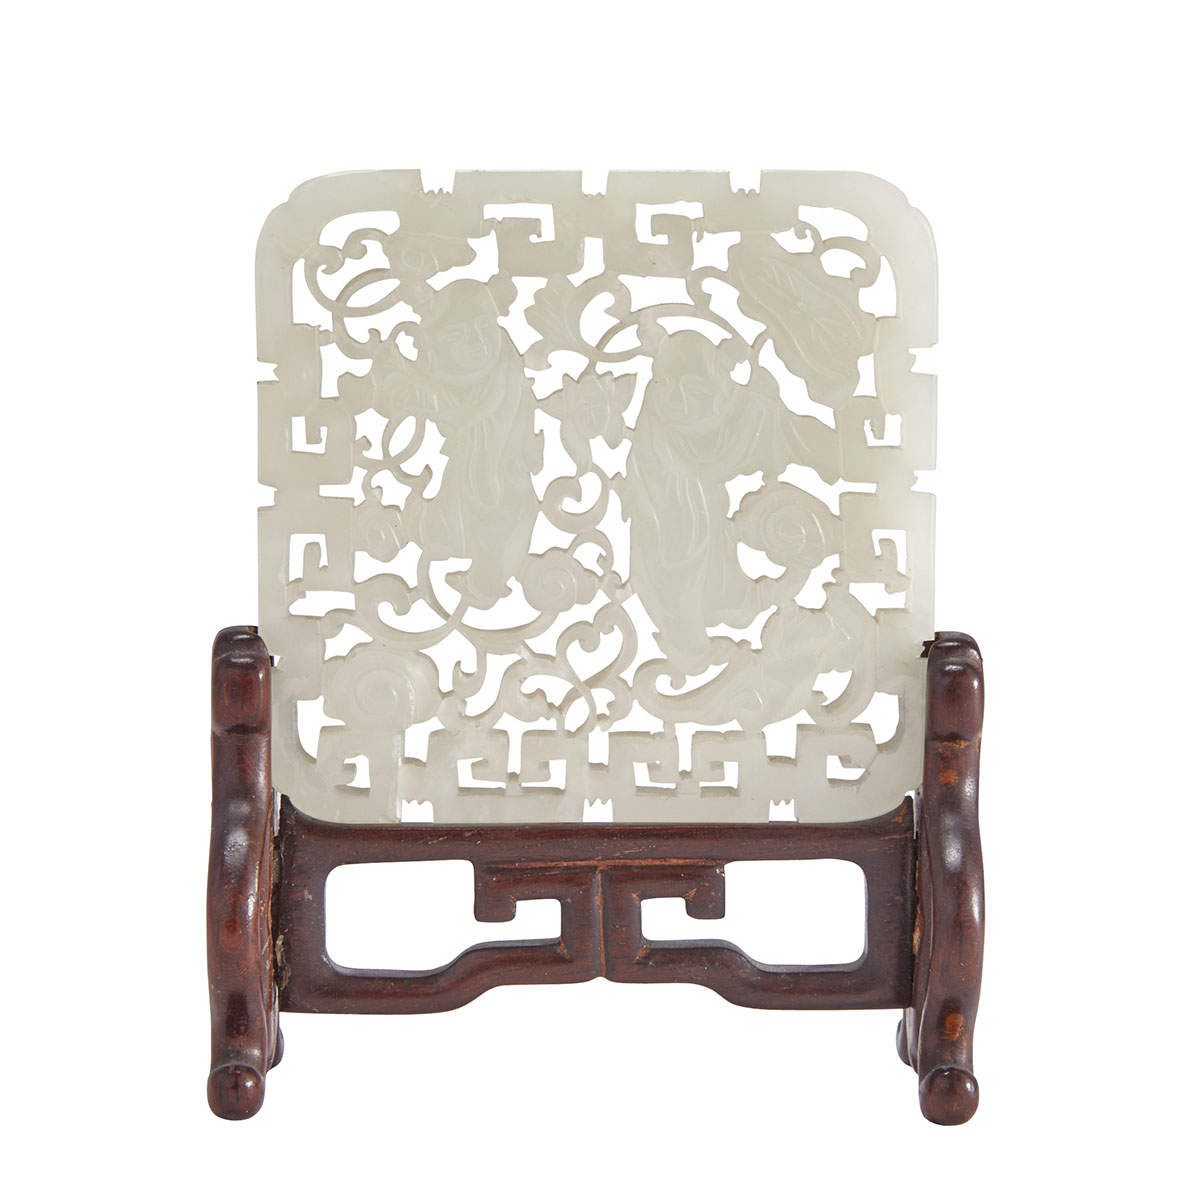 A White Jade Hehe Erxian Plaque, Qing Dynasty, 19th Century